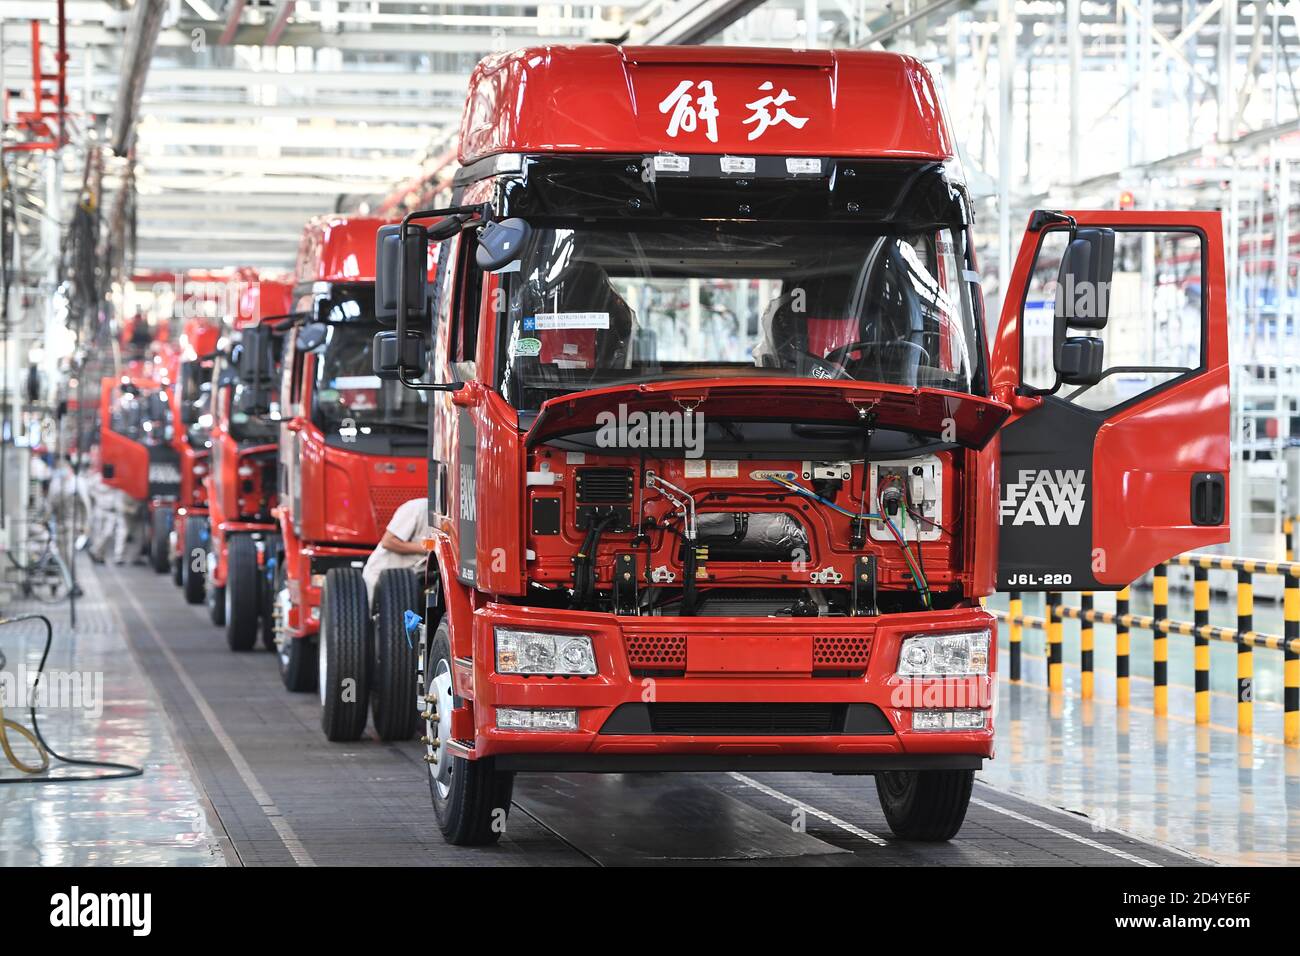 Changchun, China's Jilin Province. 23rd Sep, 2020. Vehicles wait for assembling at a factory of the First Automotive Works (FAW) Group Co., Ltd. in Changchun, capital of northeast China's Jilin Province, Sept. 23, 2020. China's leading automaker First Automotive Works (FAW) Group Co., Ltd. sold 2,656,744 vehicles in the first three quarters of the year, up 8 percent year on year, according to corporate sources. Credit: Zhang Nan/Xinhua/Alamy Live News Stock Photo